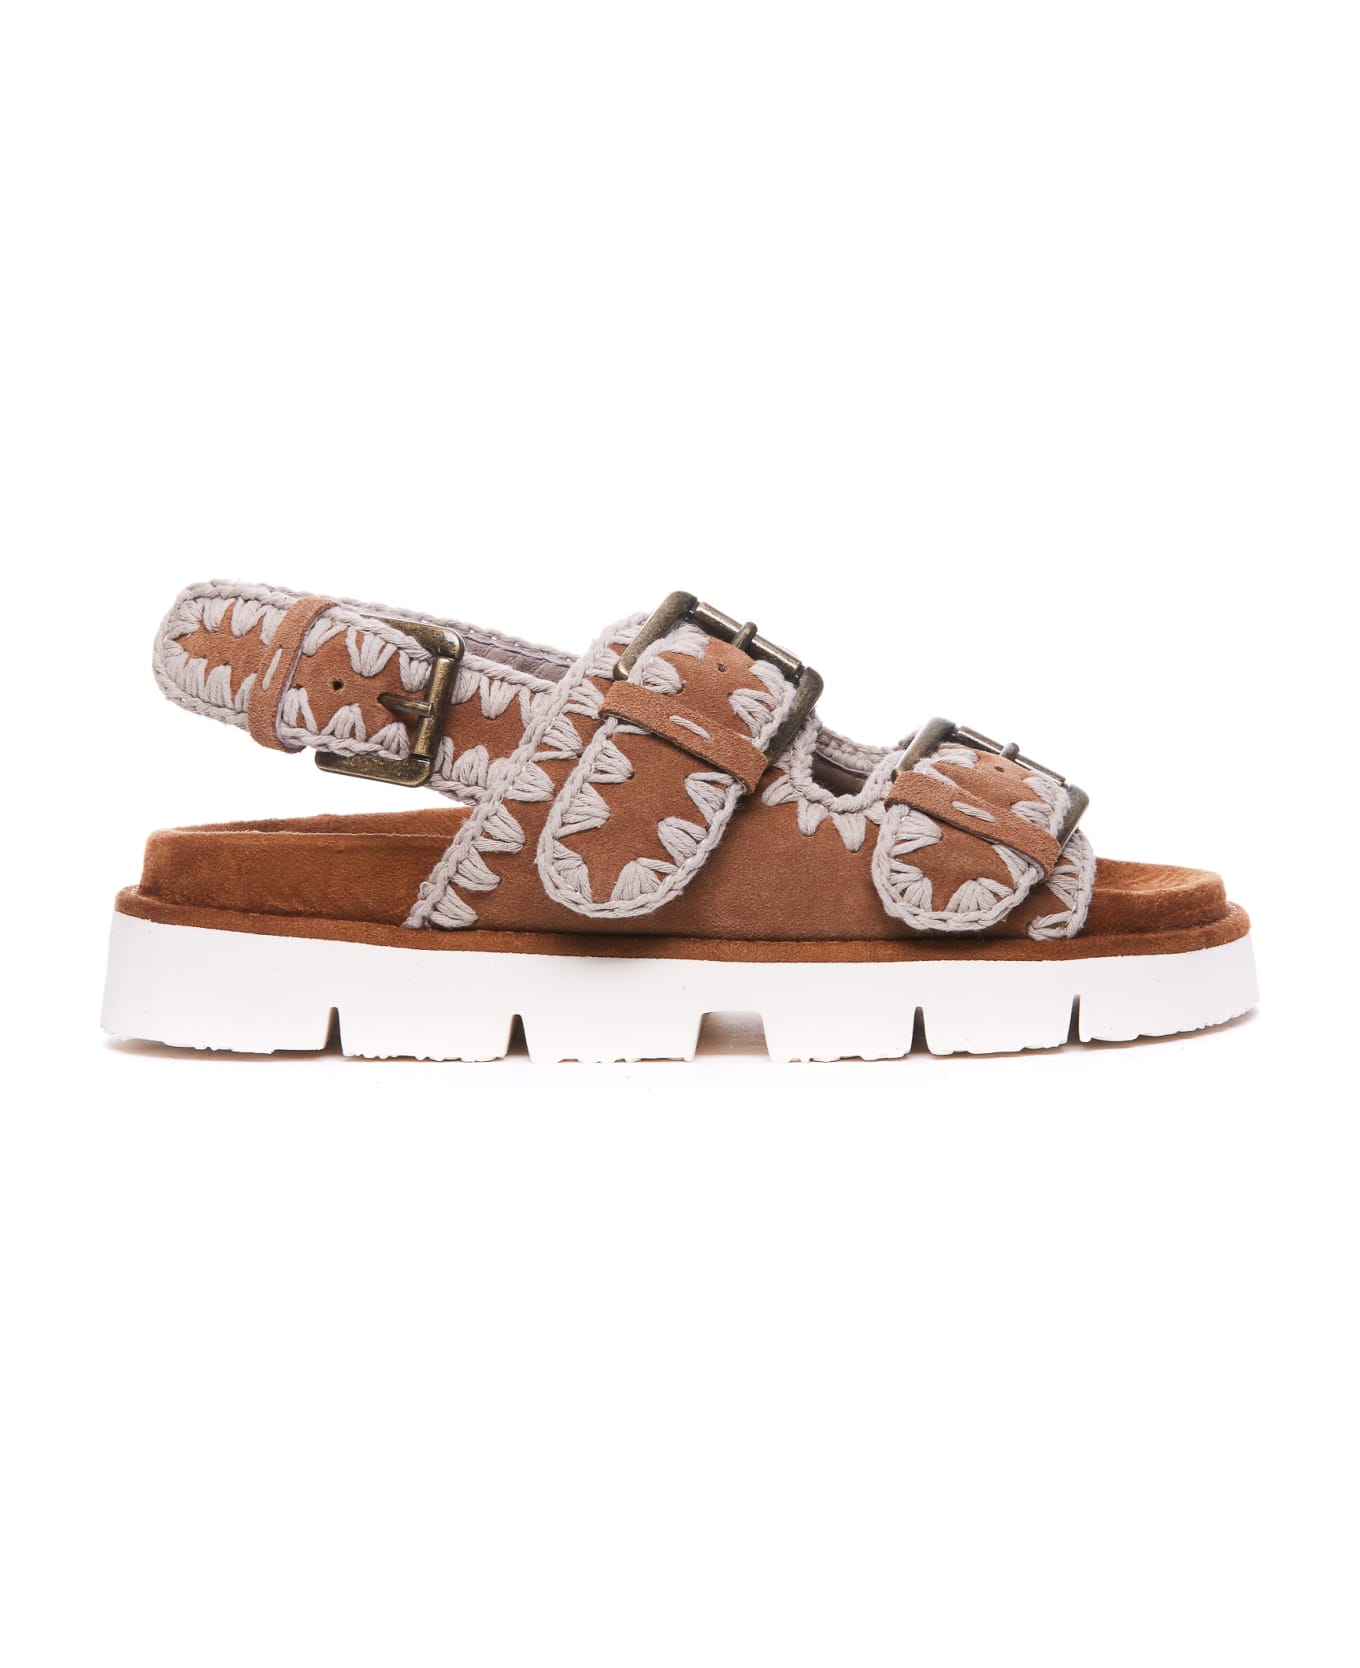 Mou New Bio Sandals - Brown